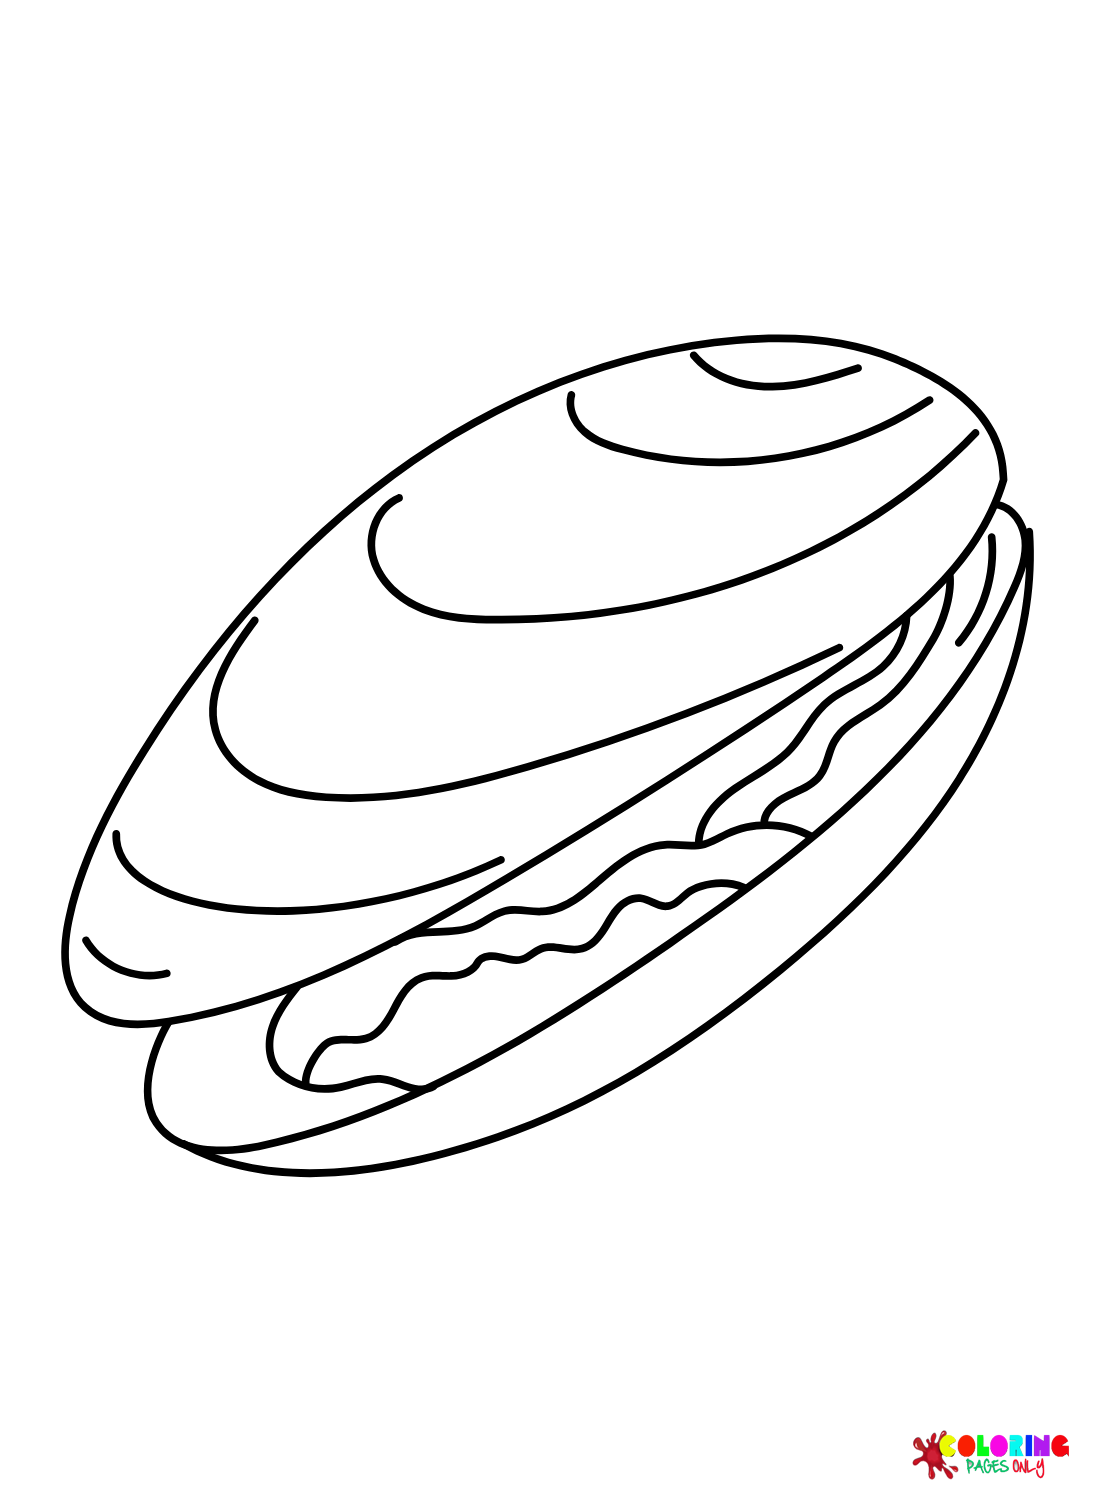 Mussels color Sheets Coloring Page